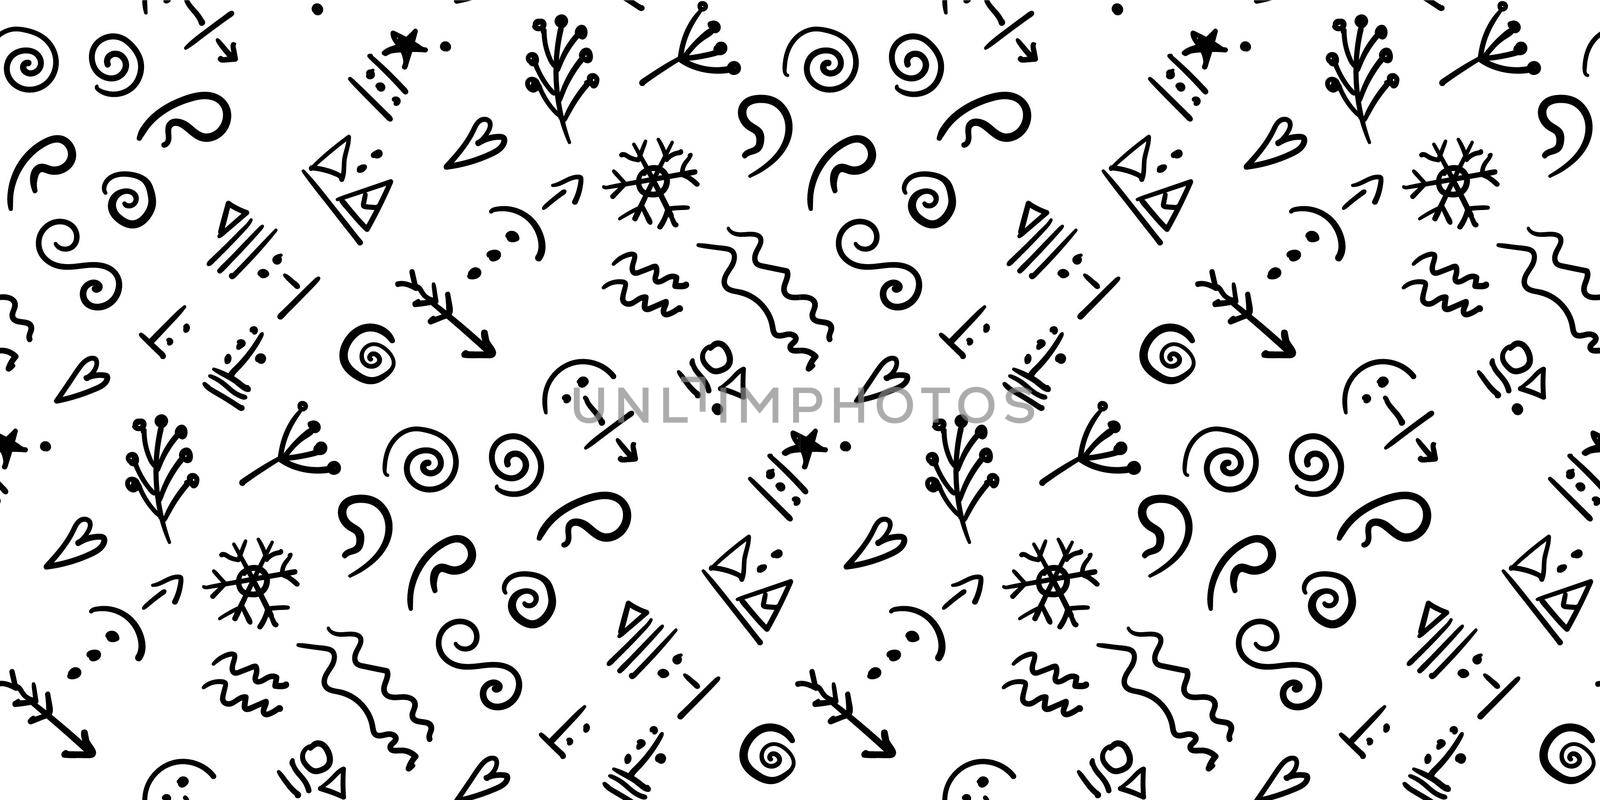 Ancient runes. Rock painting. Illustration in folk style. Stylized characters. Scandinavian print. Seamless pattern